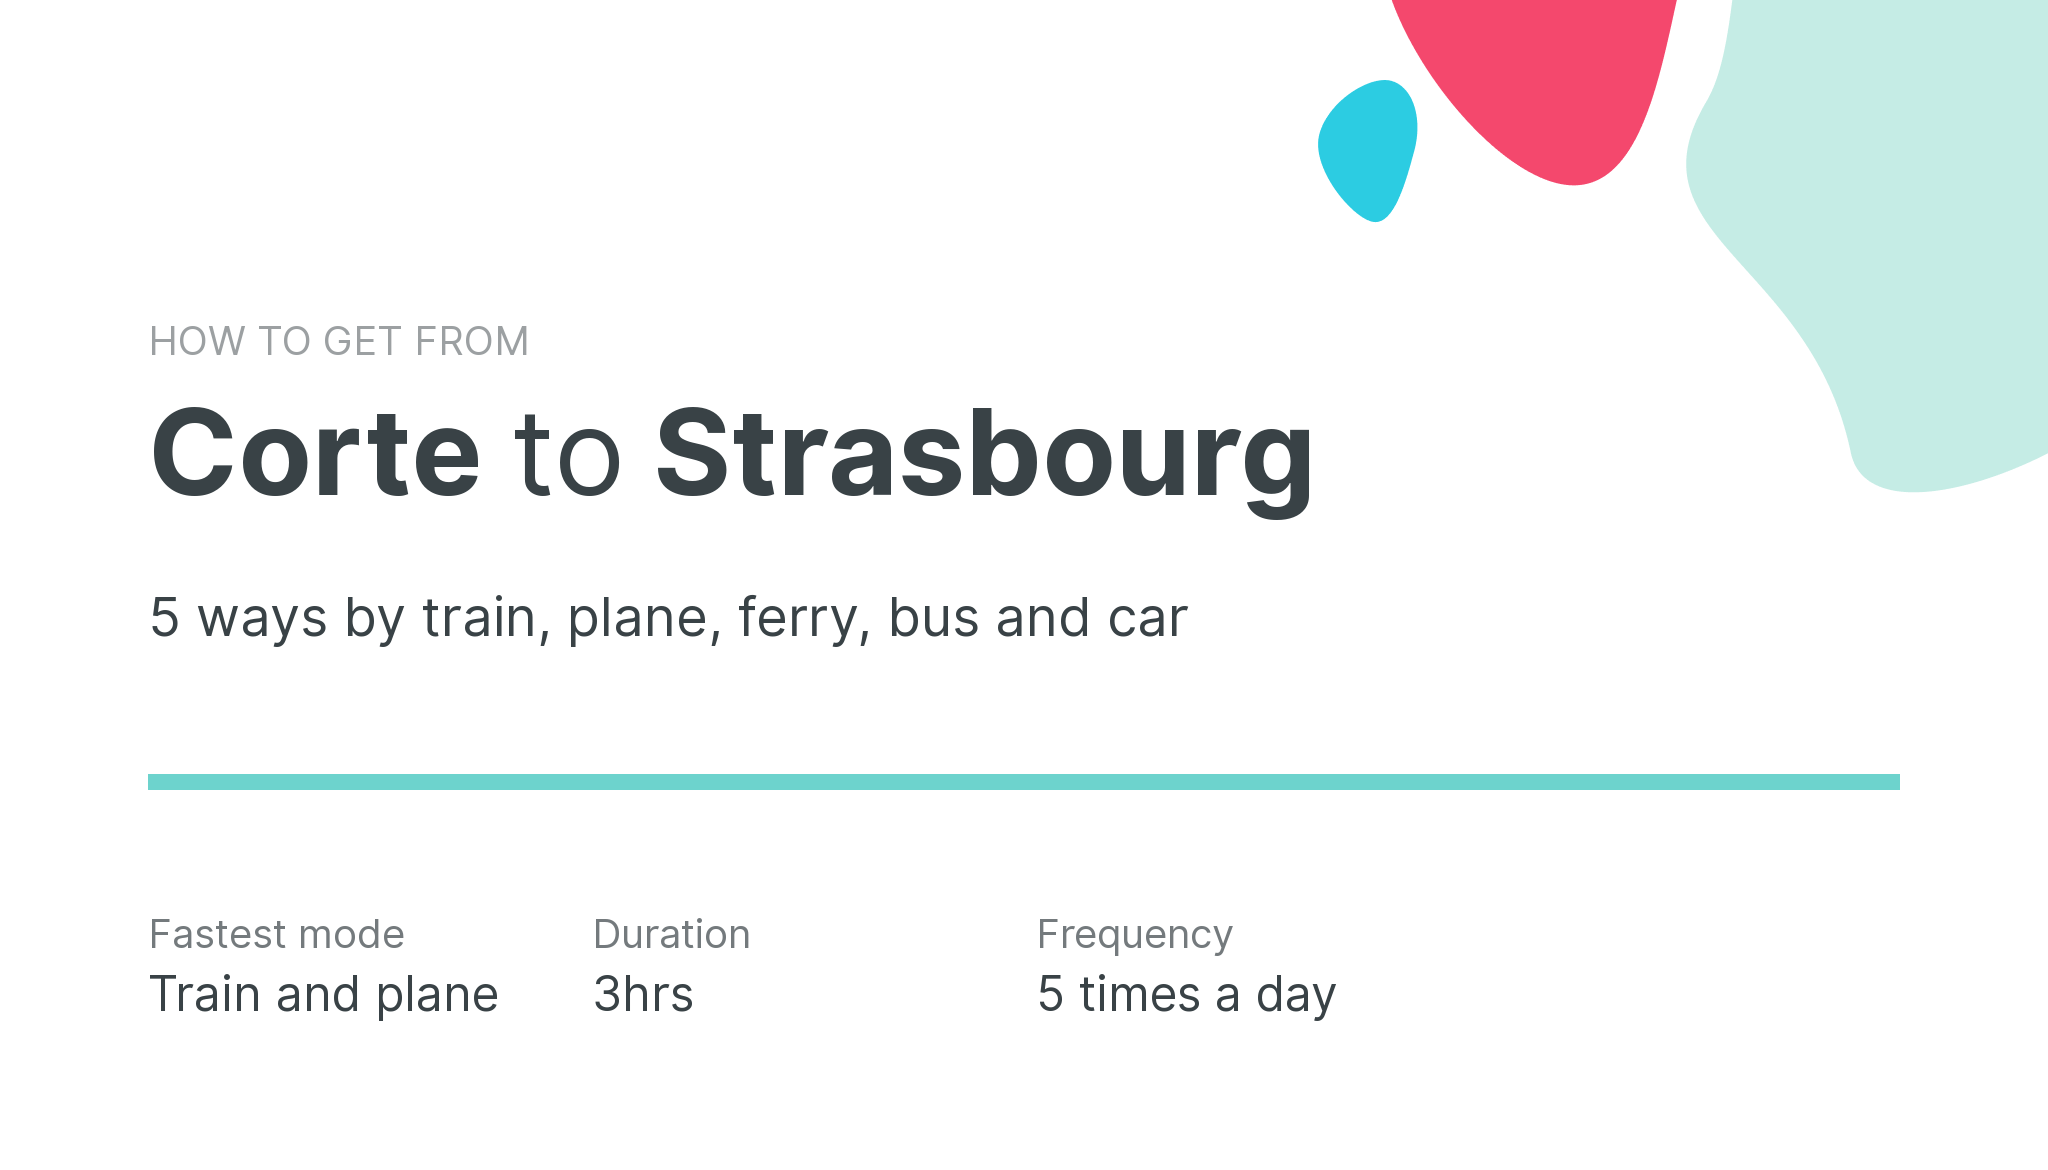 How do I get from Corte to Strasbourg